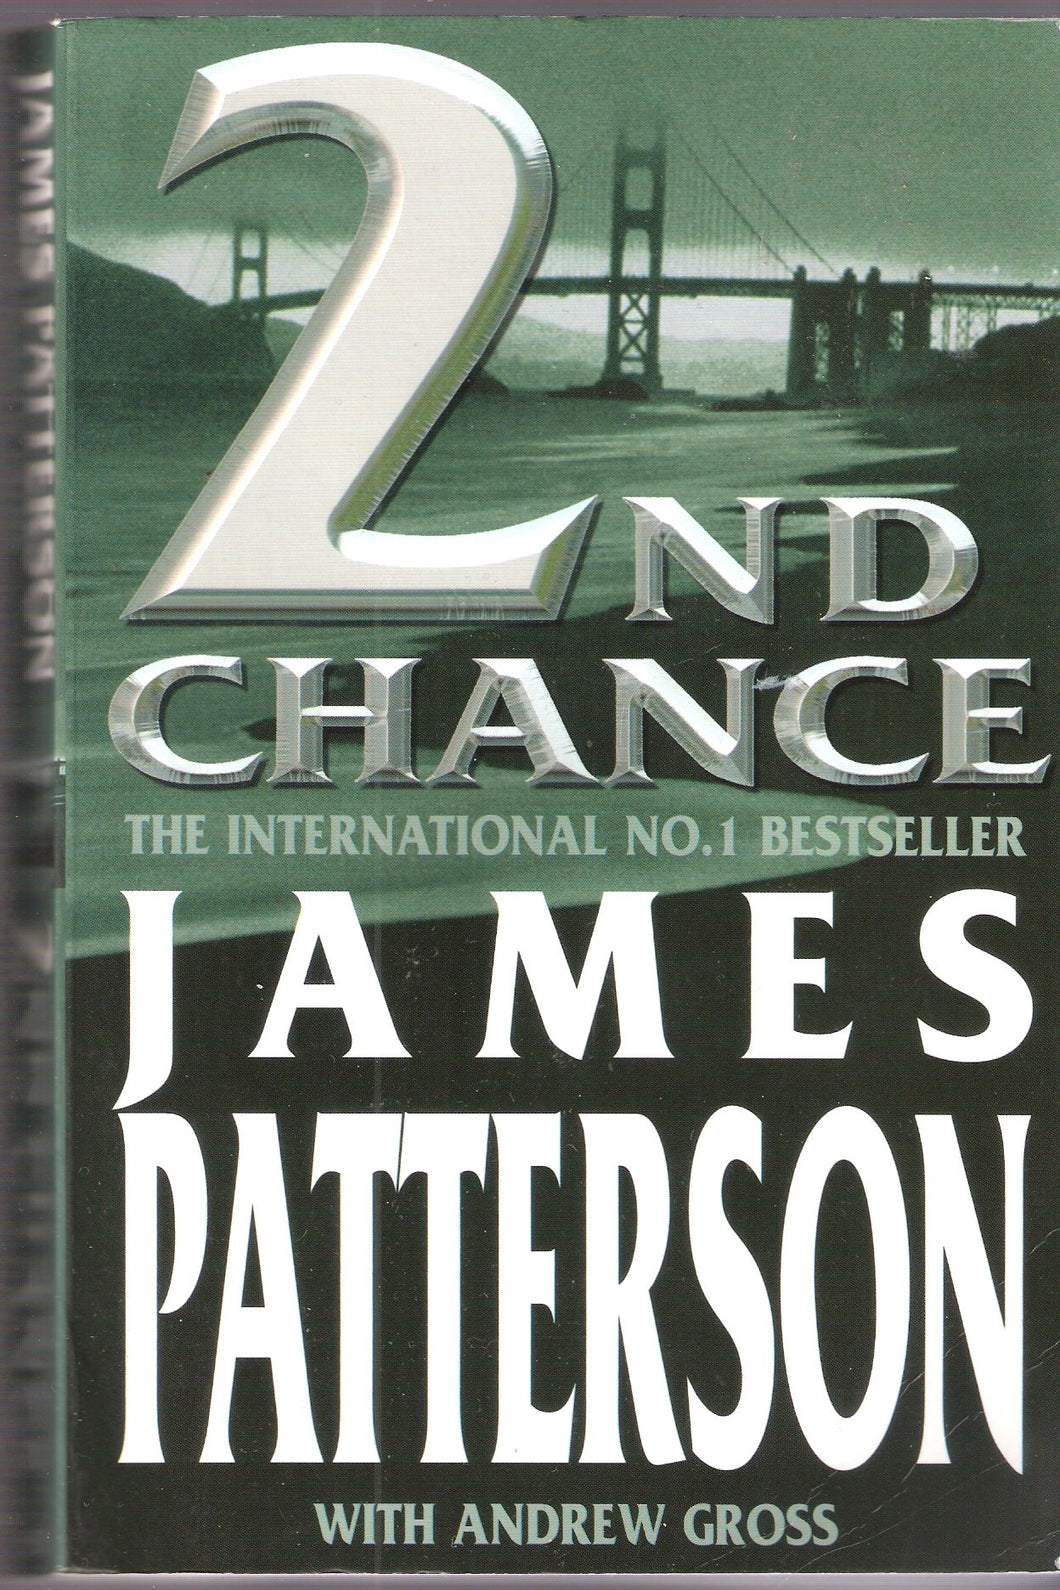 2nd Chance Patterson, James and Gross, Andrew